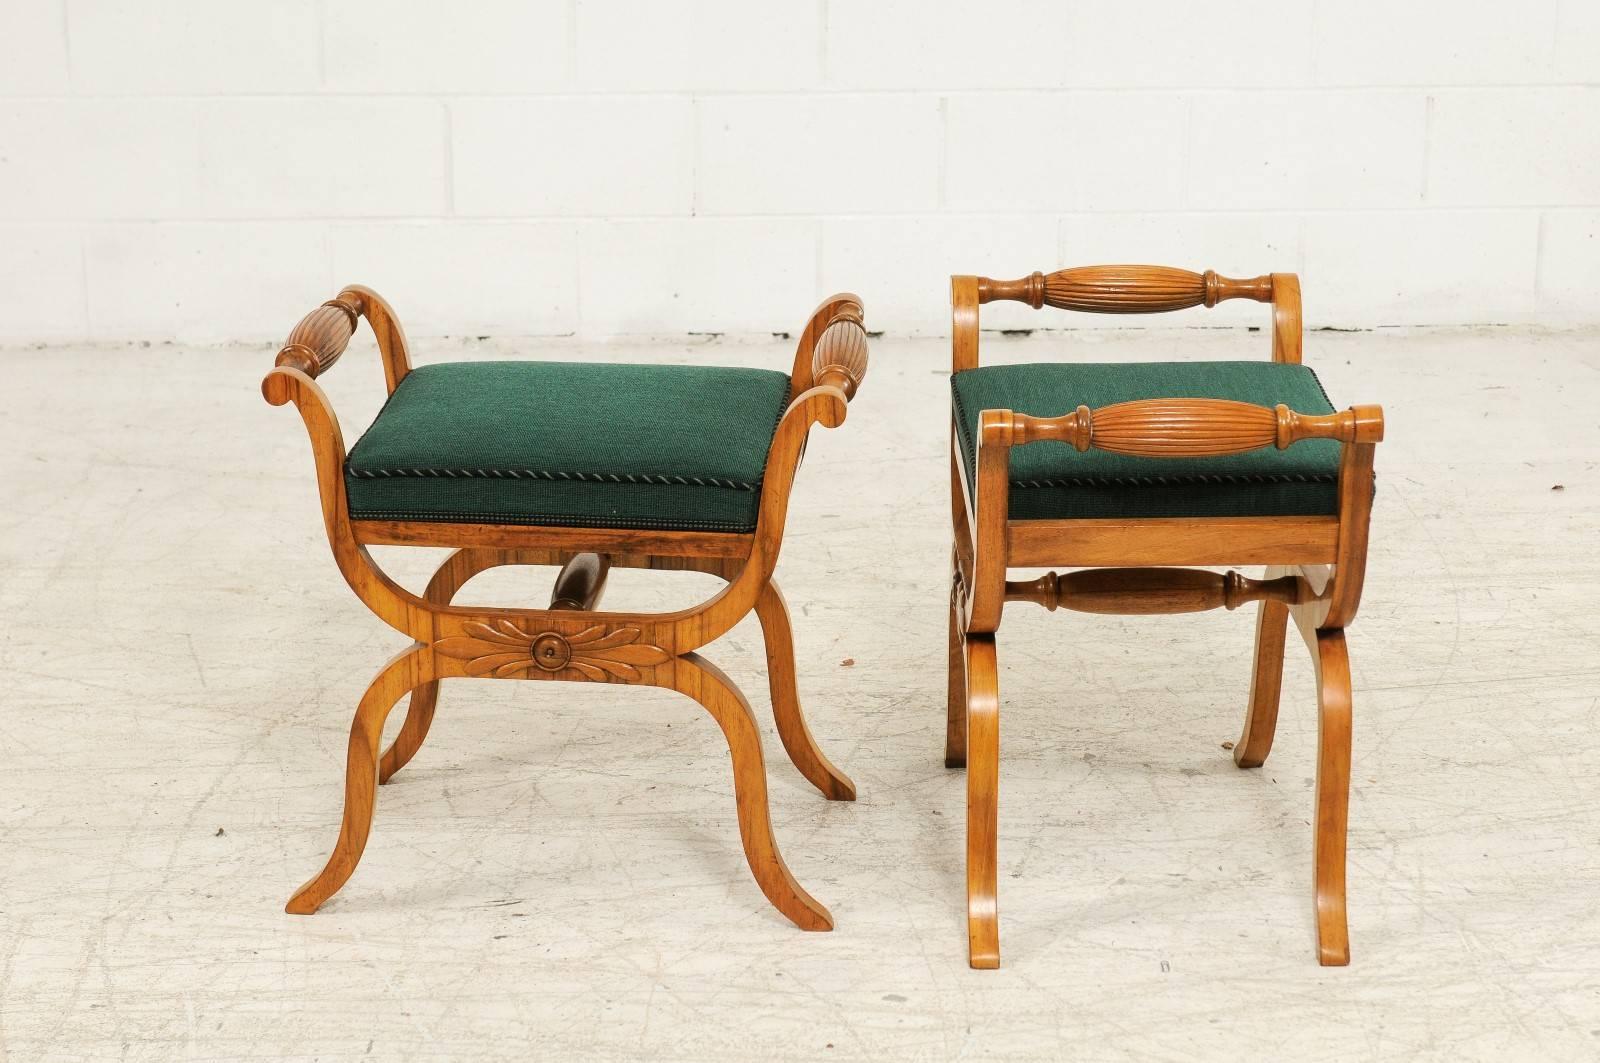 19th Century Pair of 1850s Austrian Biedermeier X-Form Stools with Green Upholstered Seats